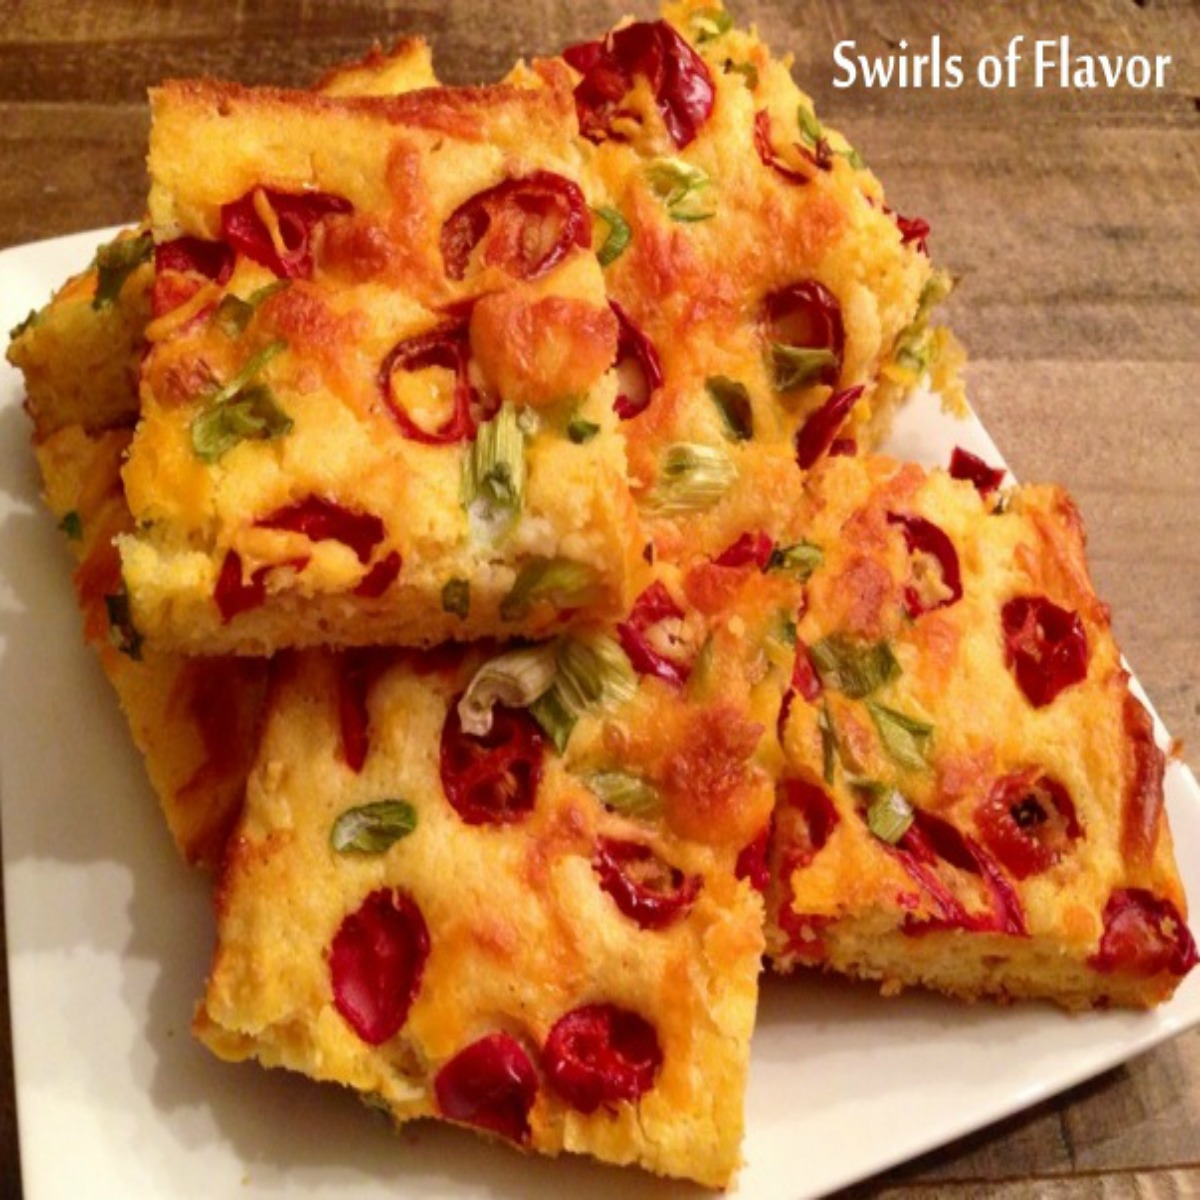 Jalapeno Cheddar cornbread cut in squares and on a platter